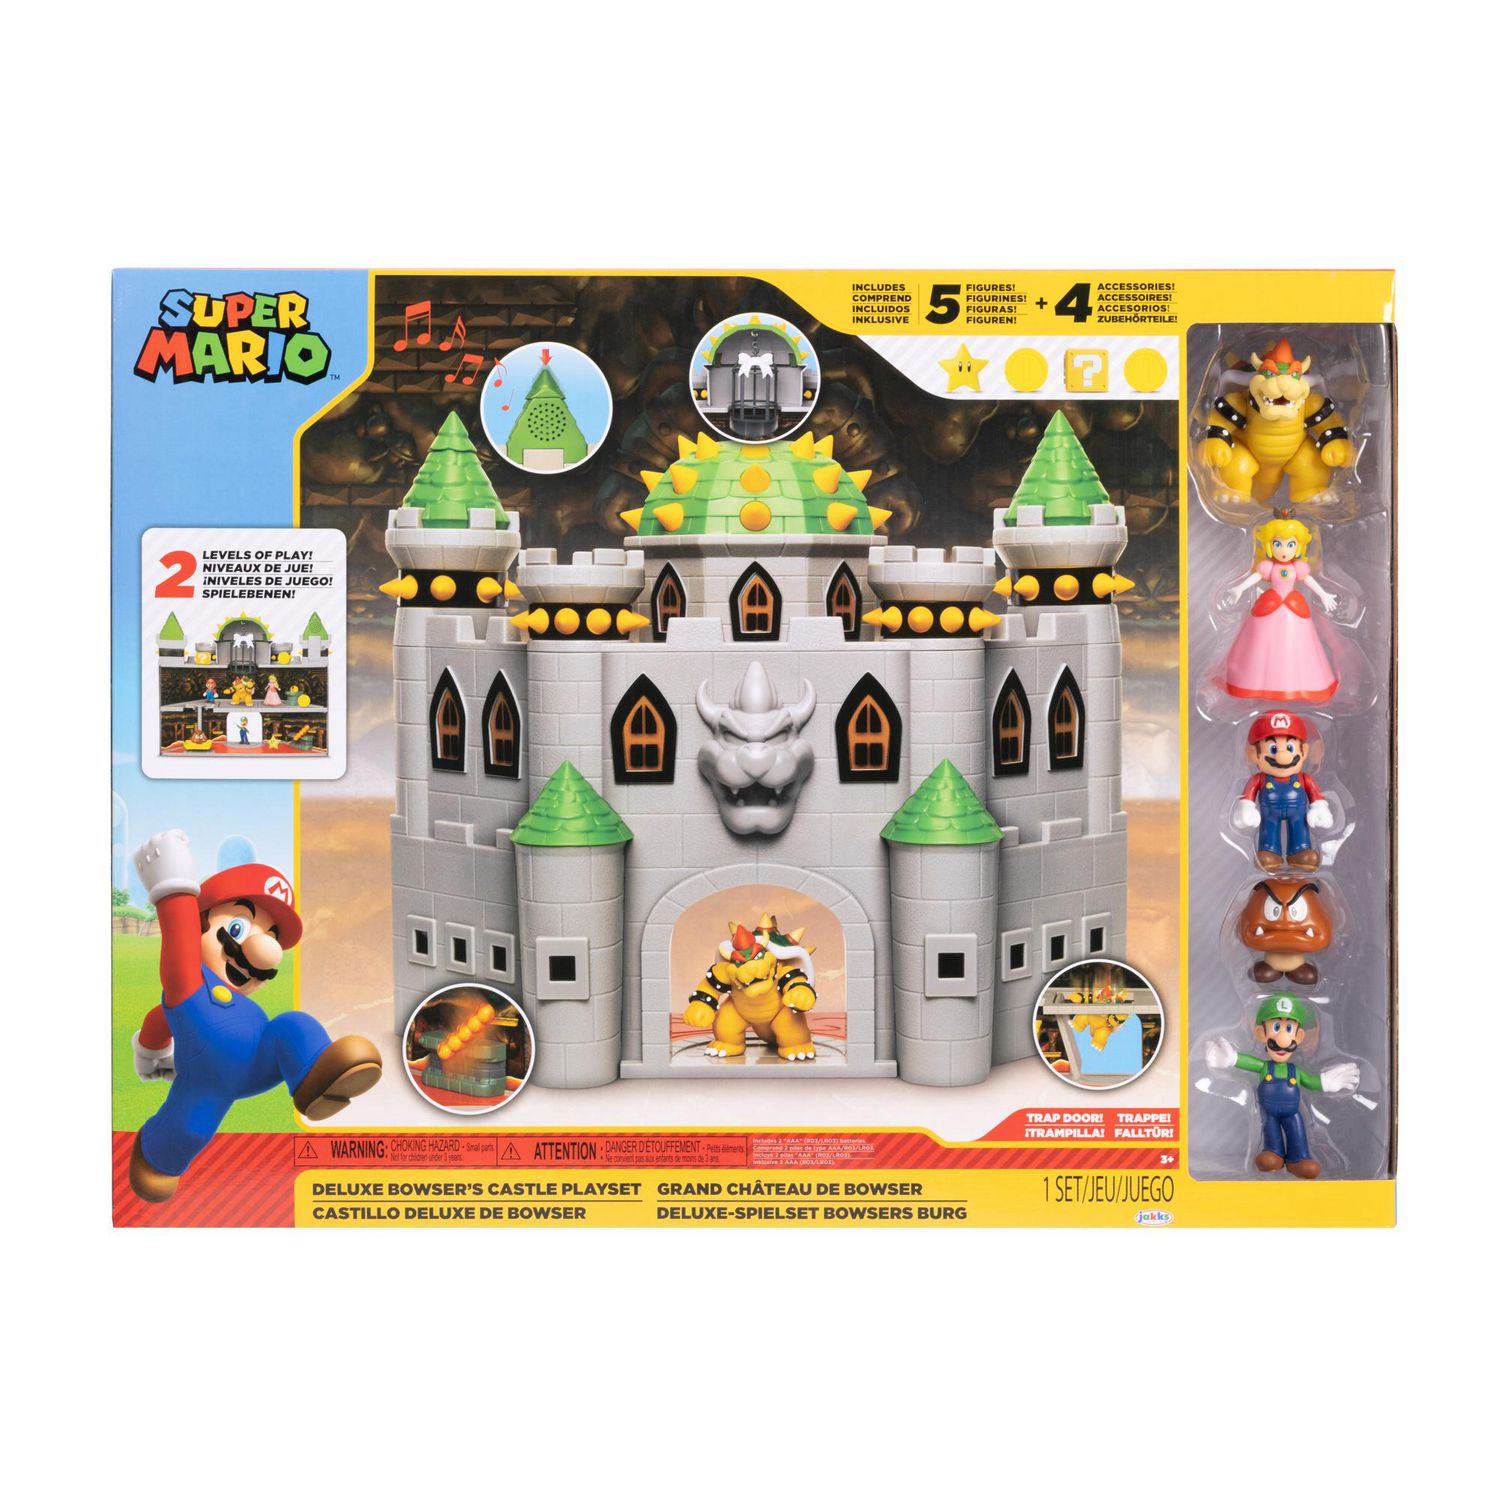 explore　video　from　Castle　Nintendo　classic　you　Bowser's　The　Deluxe　level　Mario　Castle　Playset　the　let's　Super　this　ga-　Bowser´s　Playset